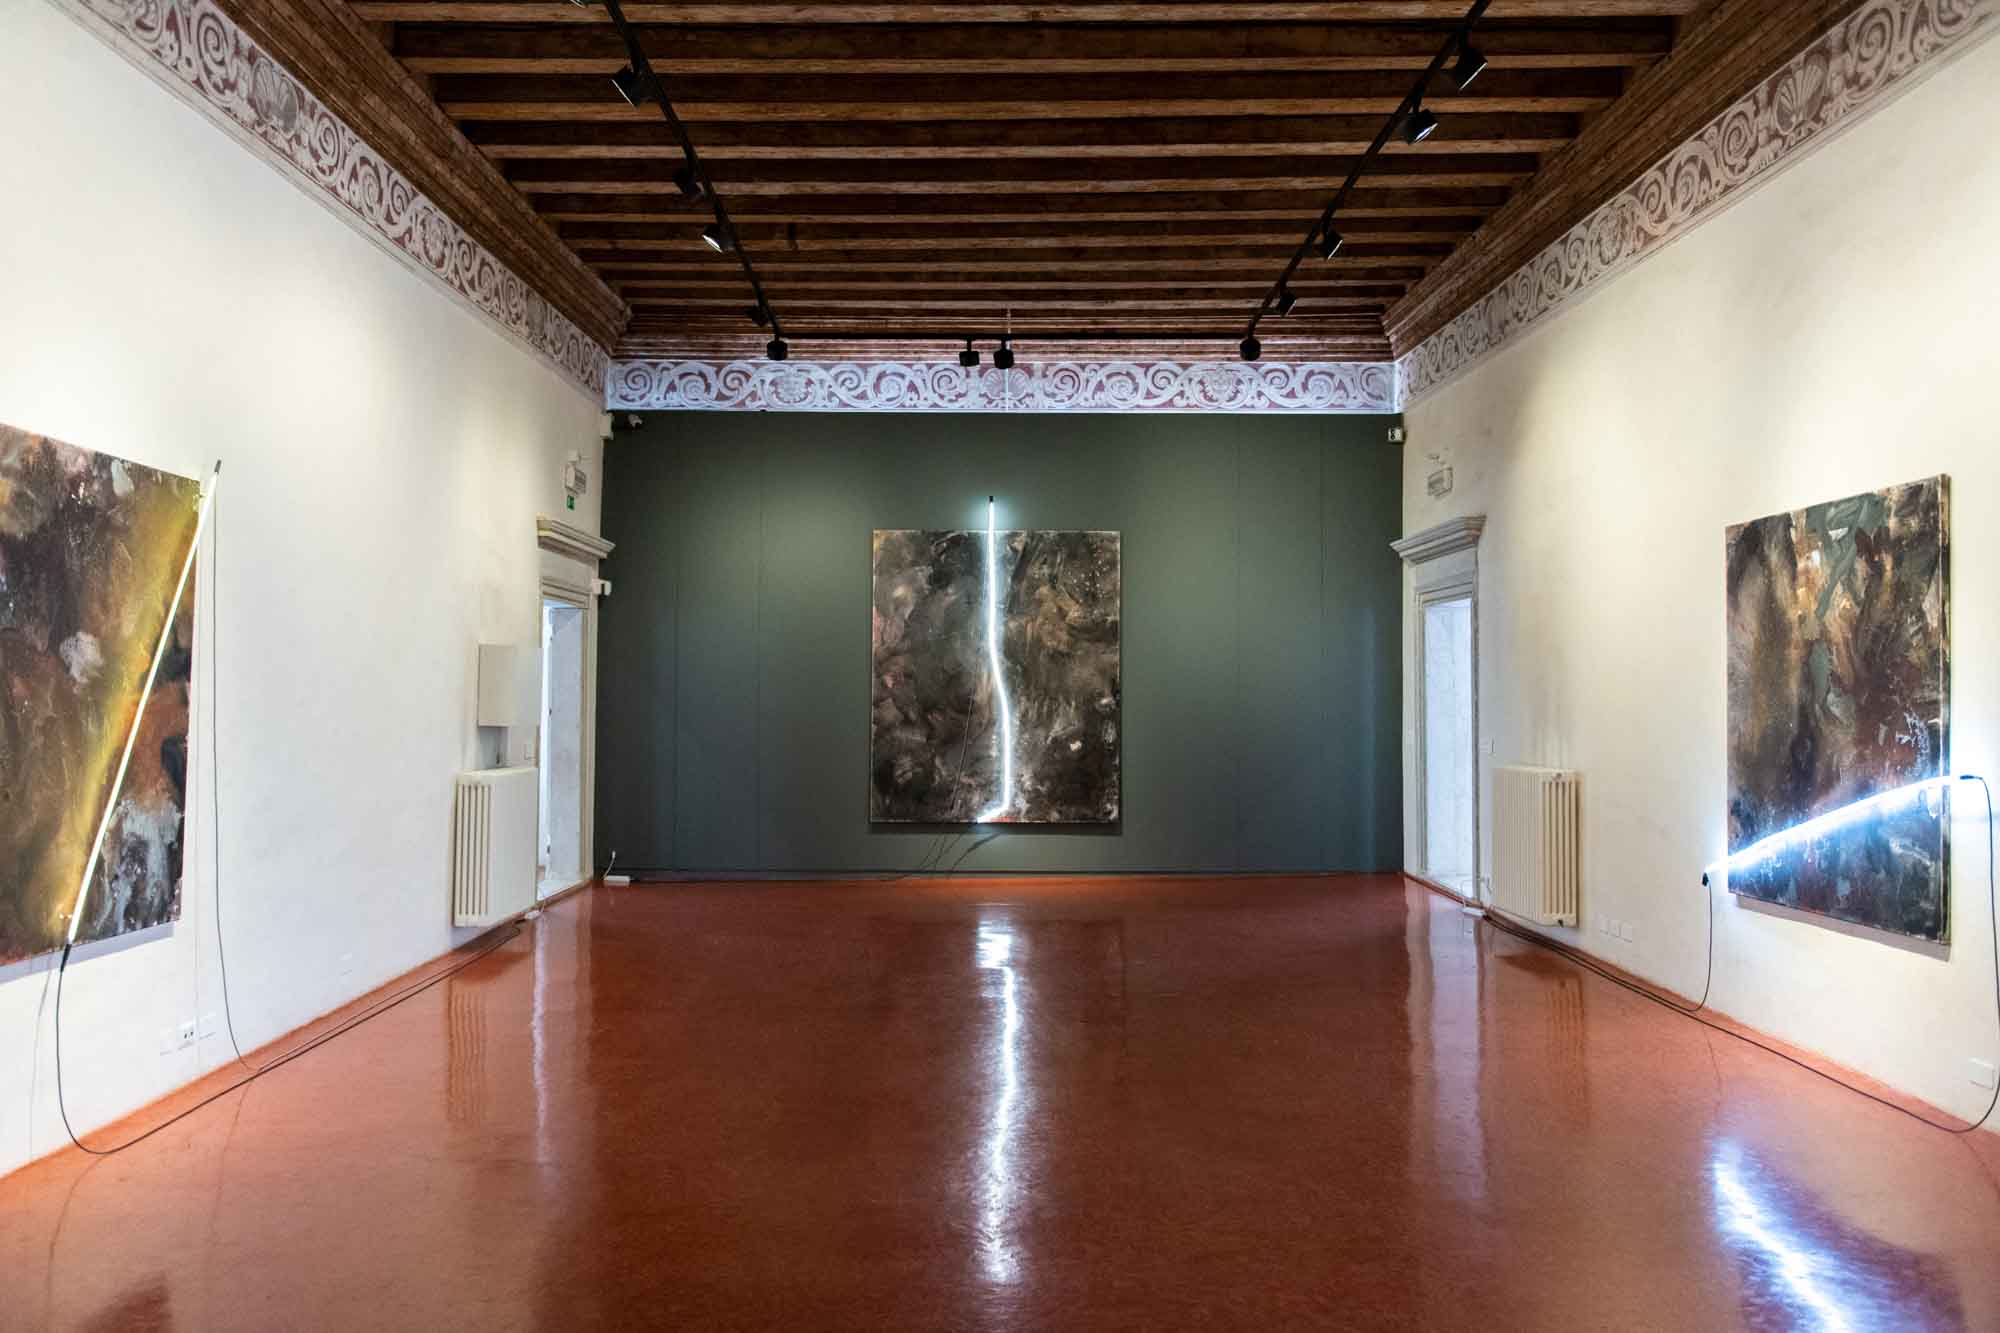 Mary Weatherford at the Palazzo Grimani